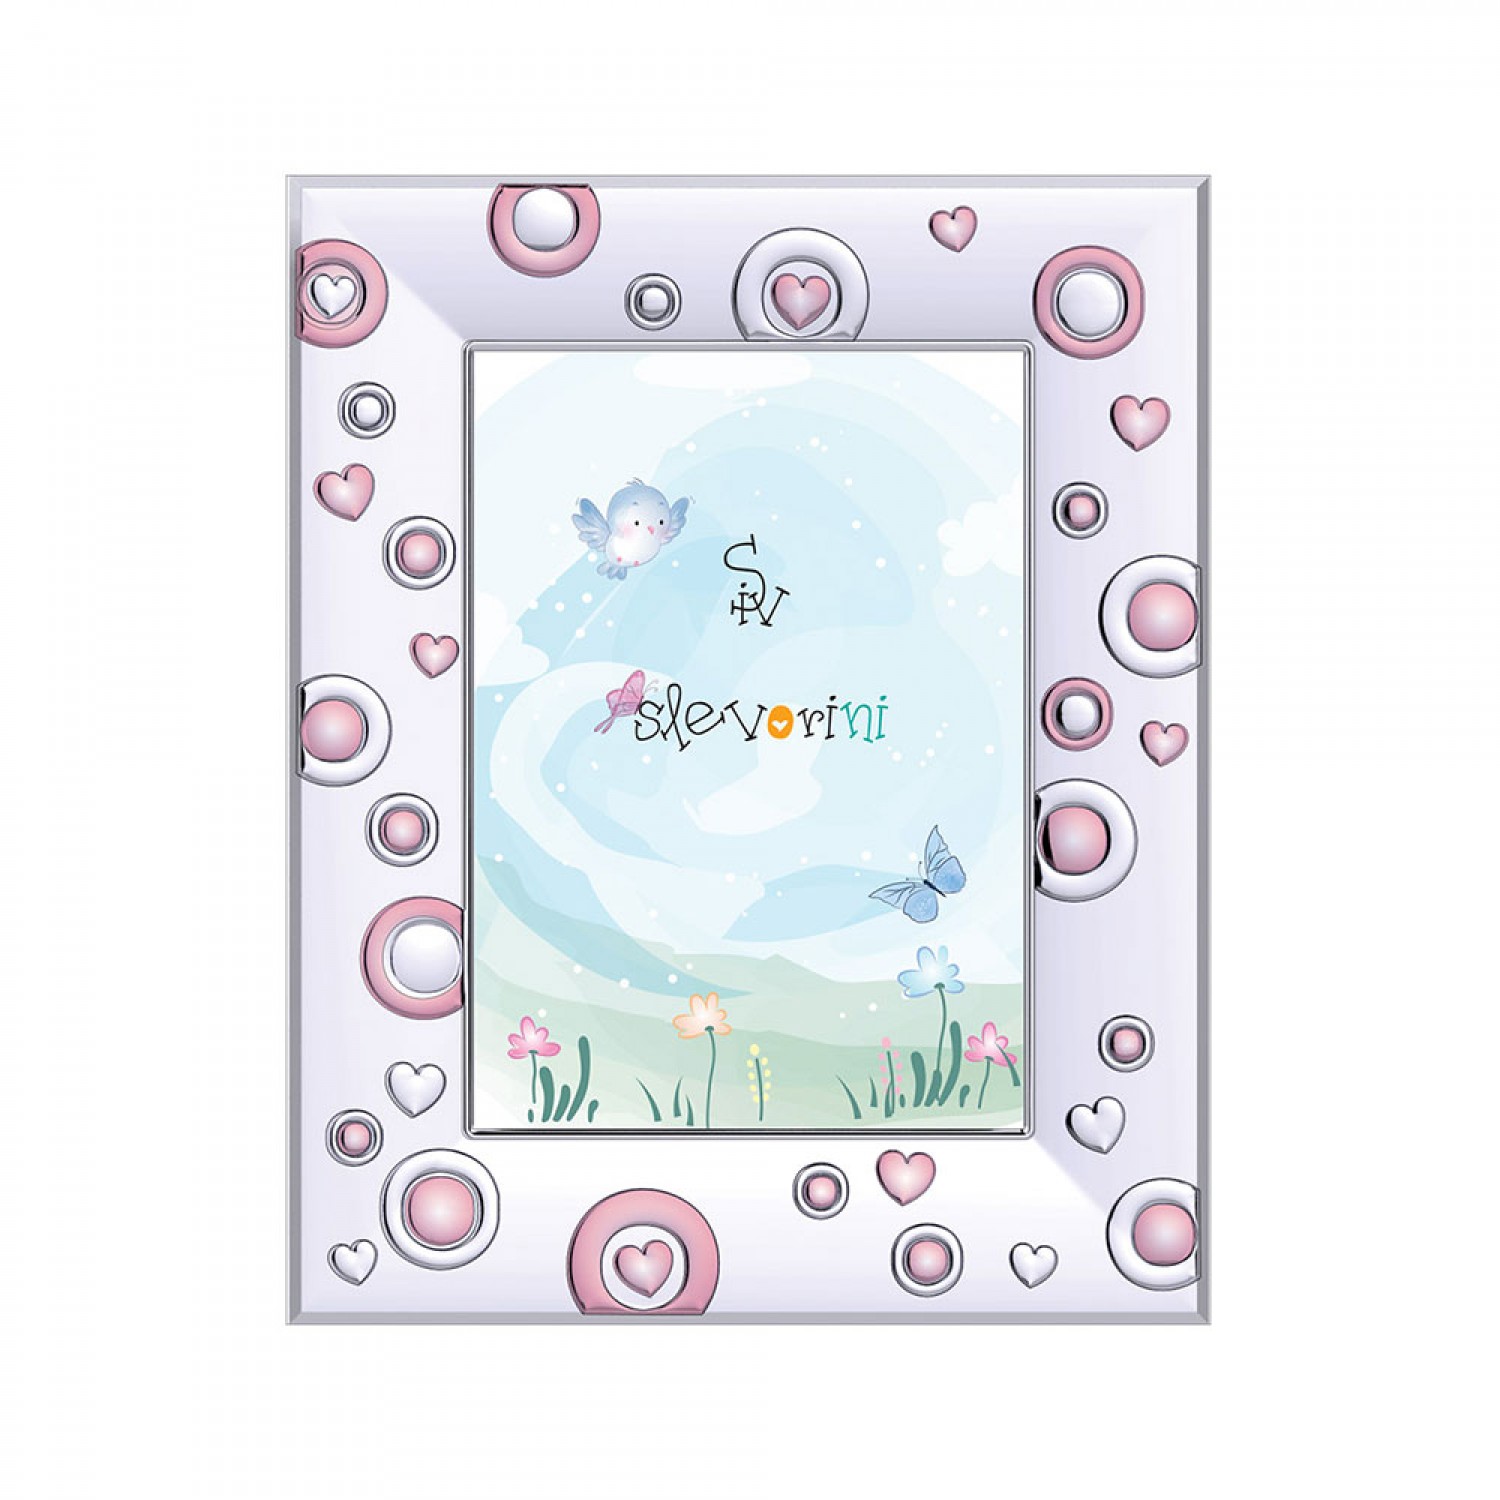 Childrens frame for little girl with pink circles and hearts 13X18.